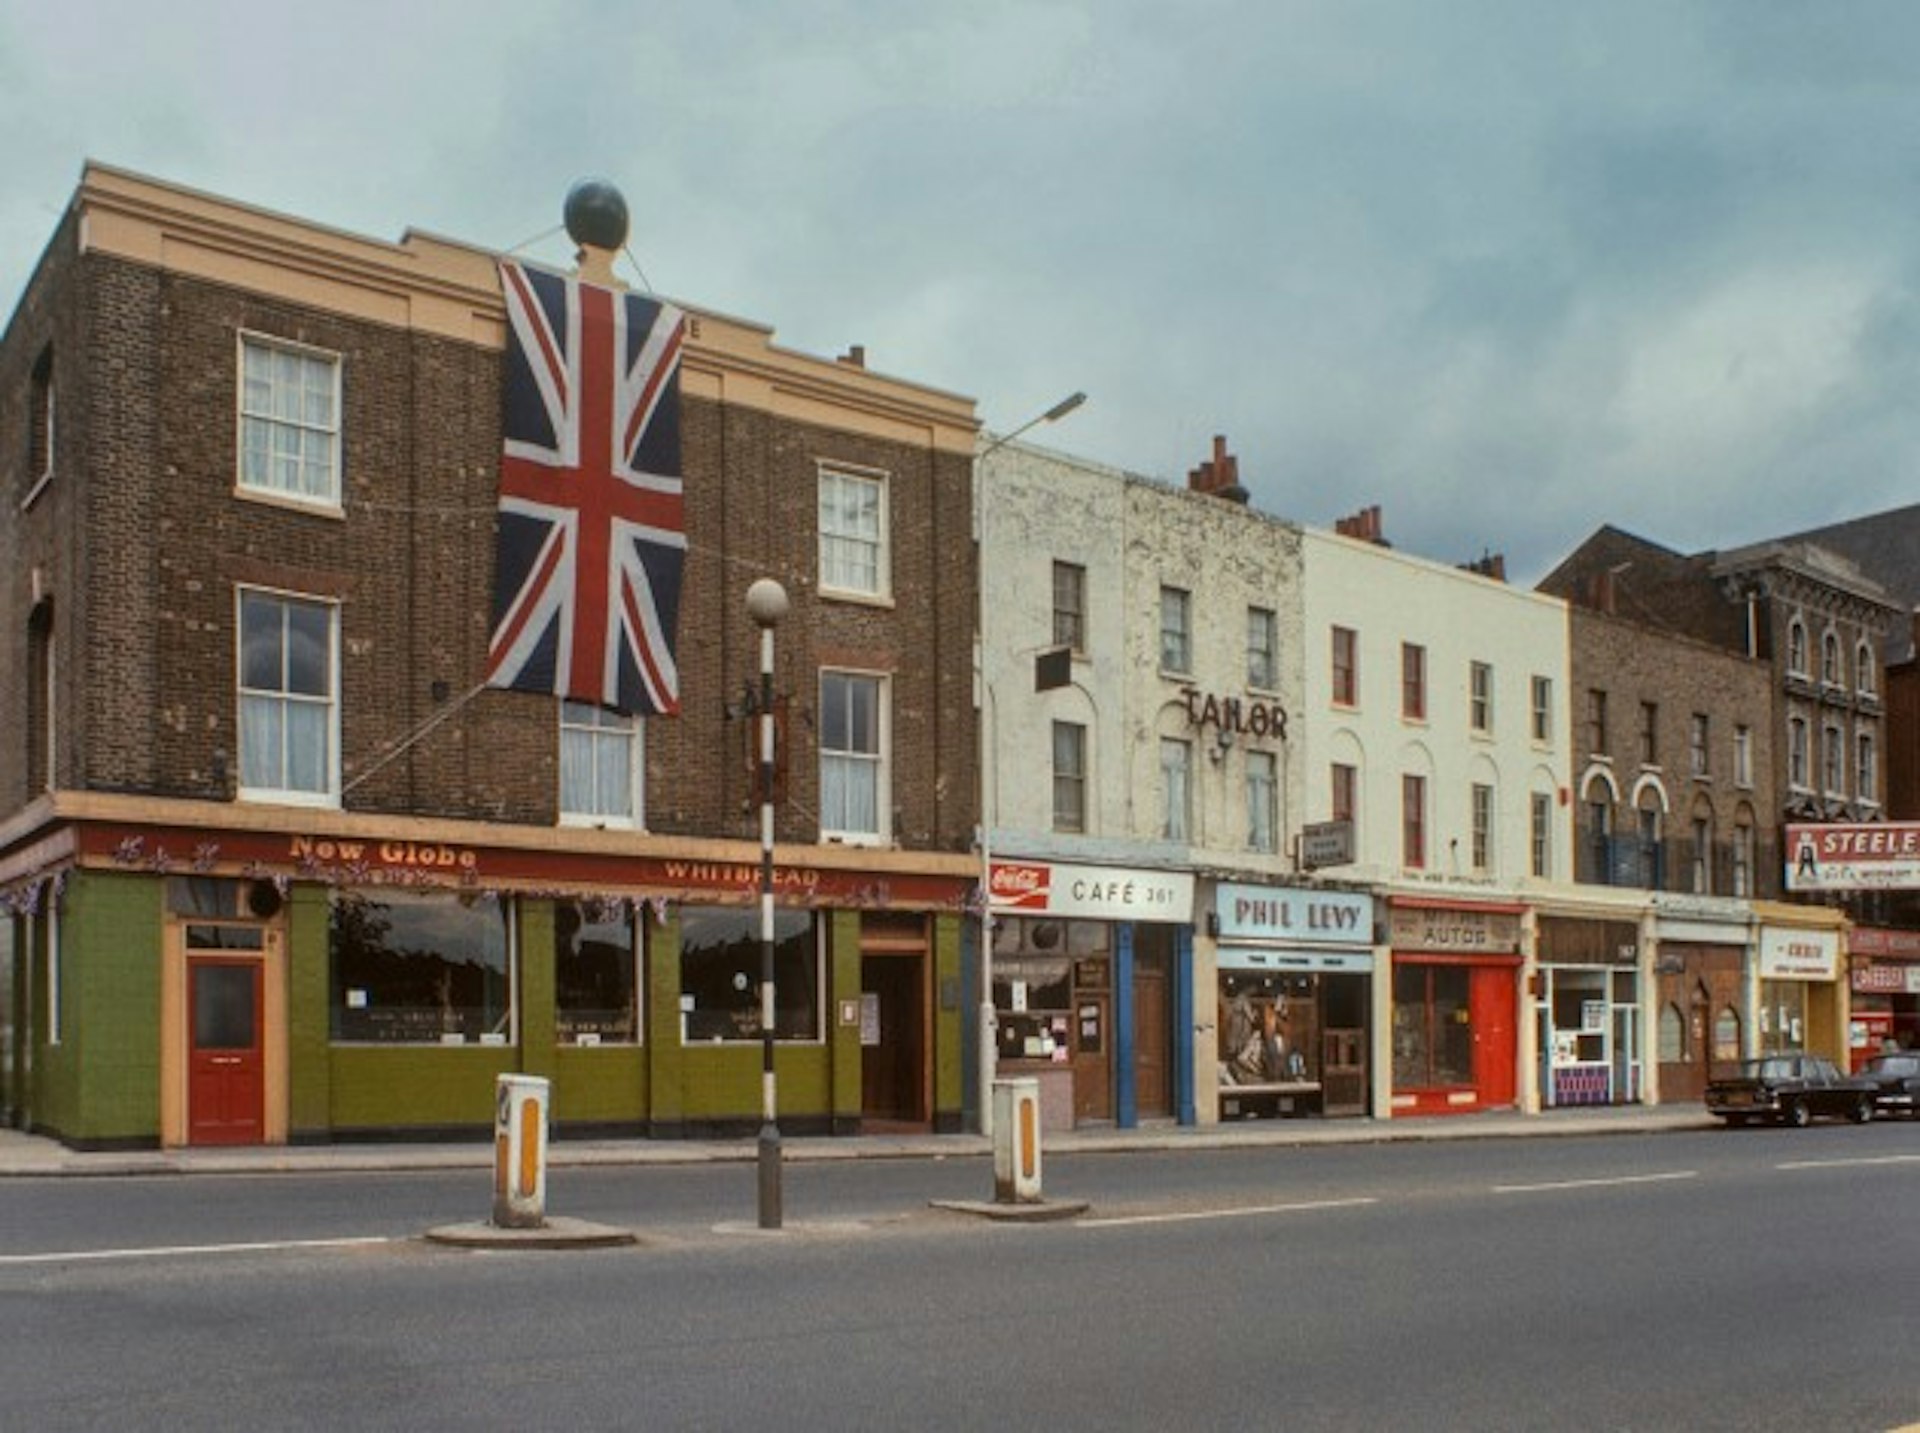 CommercialRoad_1969_credit_DavidGranick_Courtesyof_Tower Hamlets Local History Library & Archives (1)